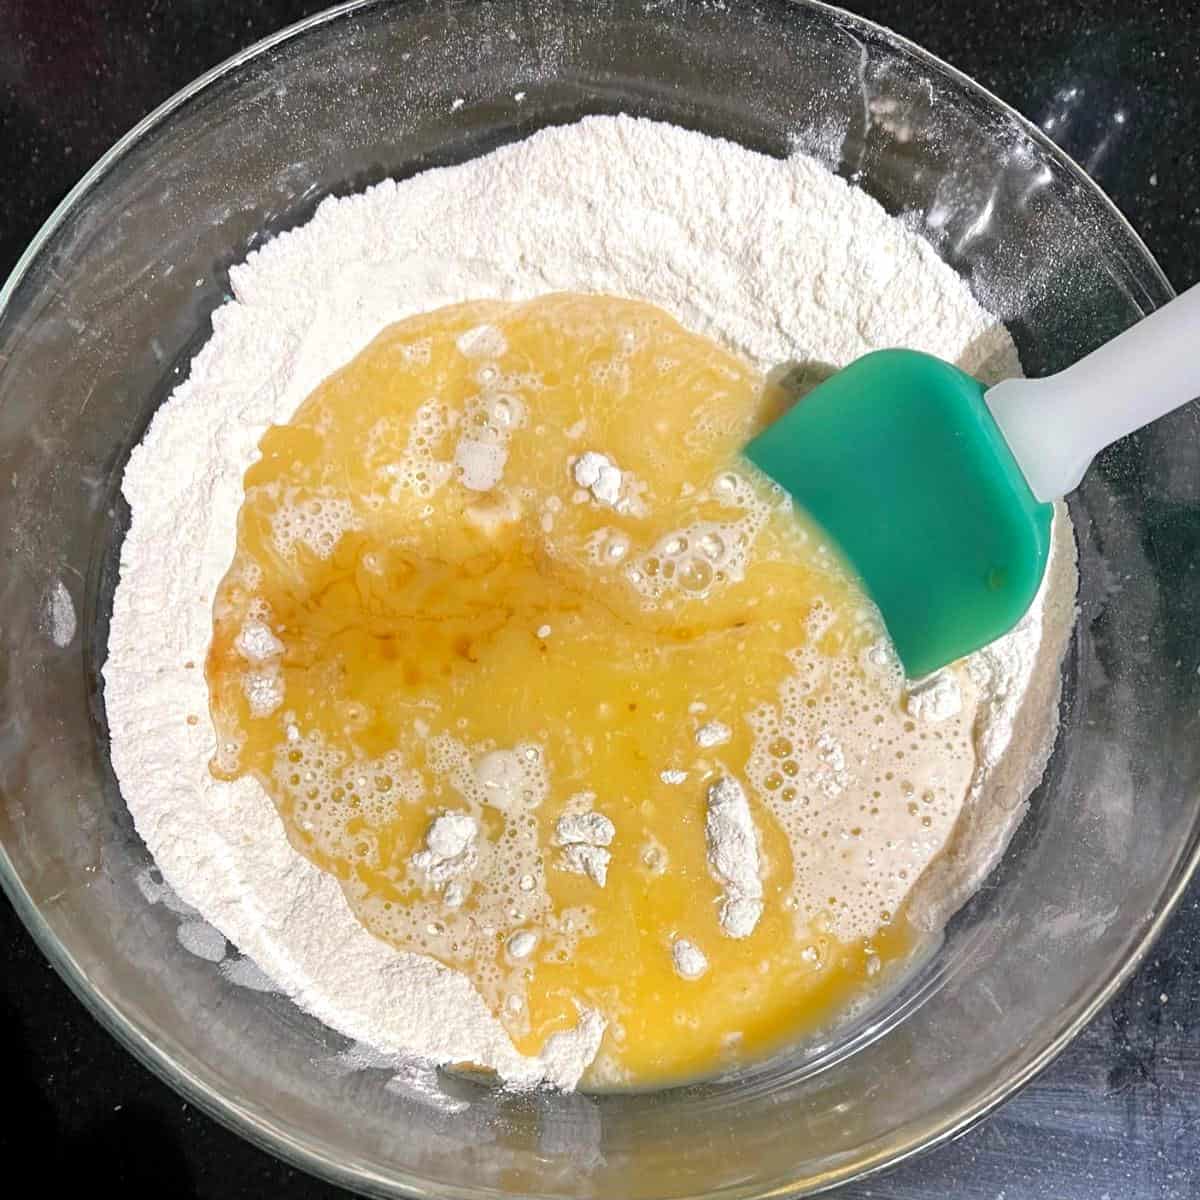 Wet ingredients added to dry in glass bowl with spatula.